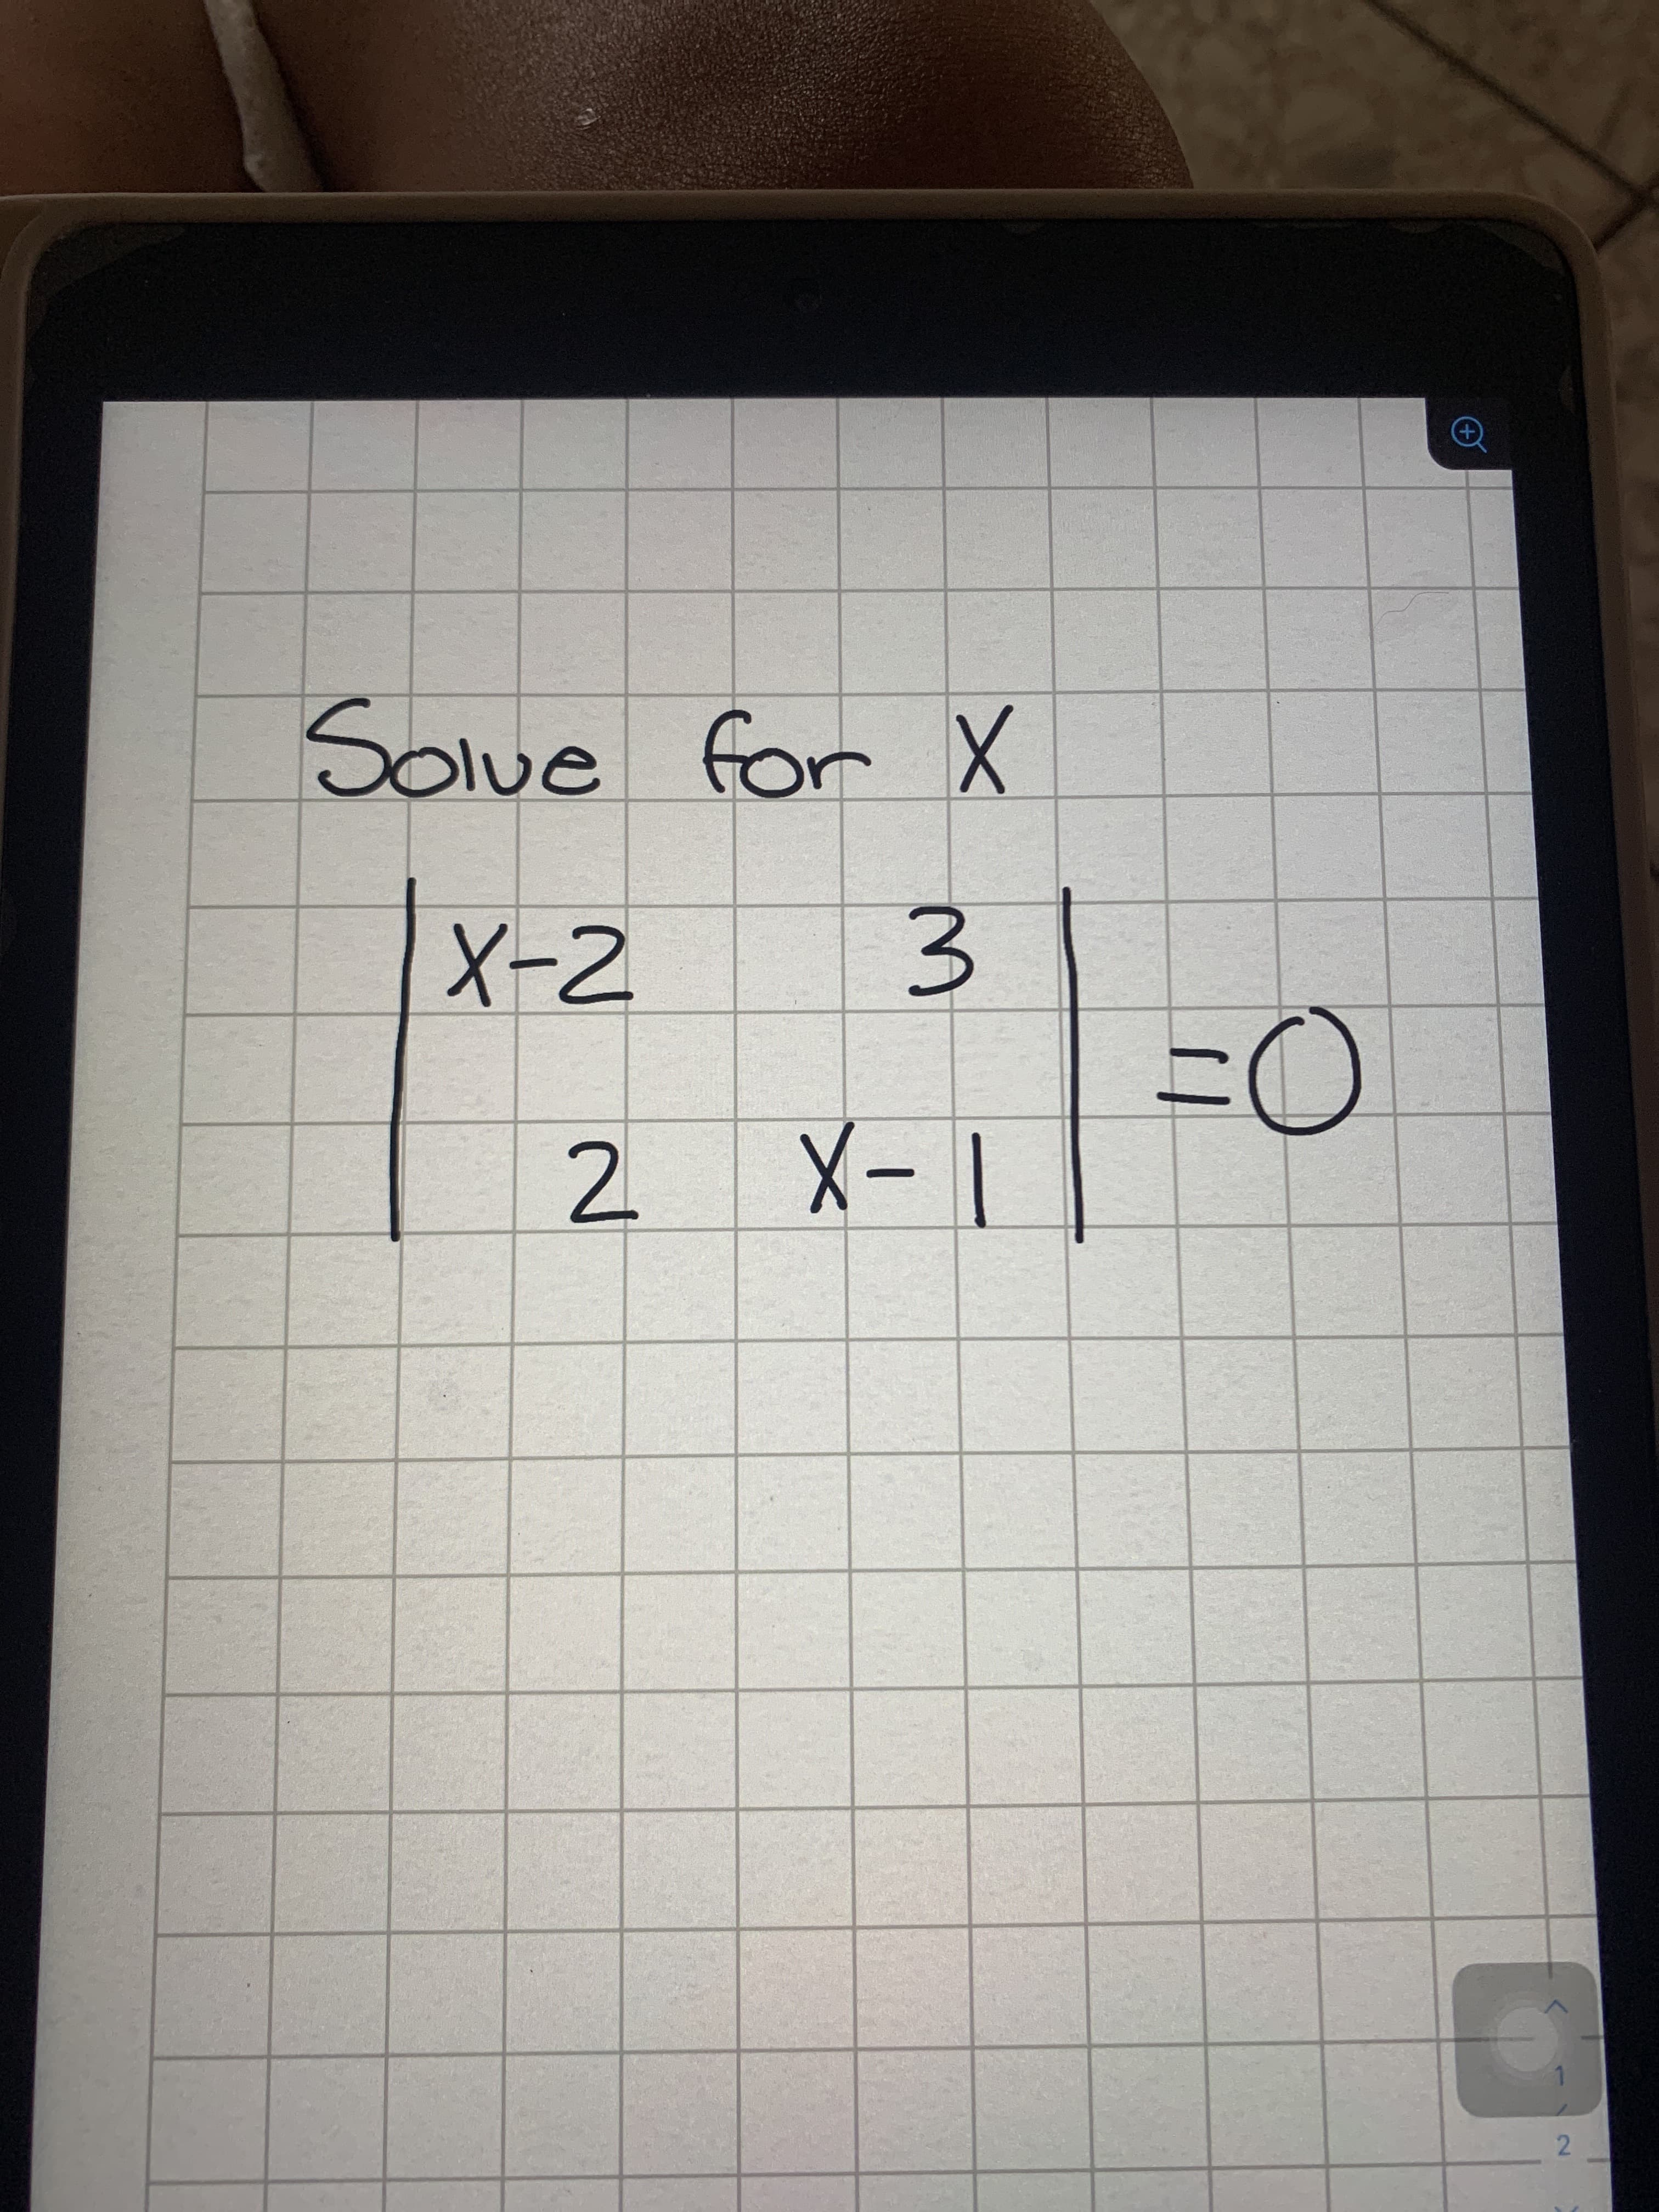 Solve for X
Olue
X-2
2.
X-
3.
